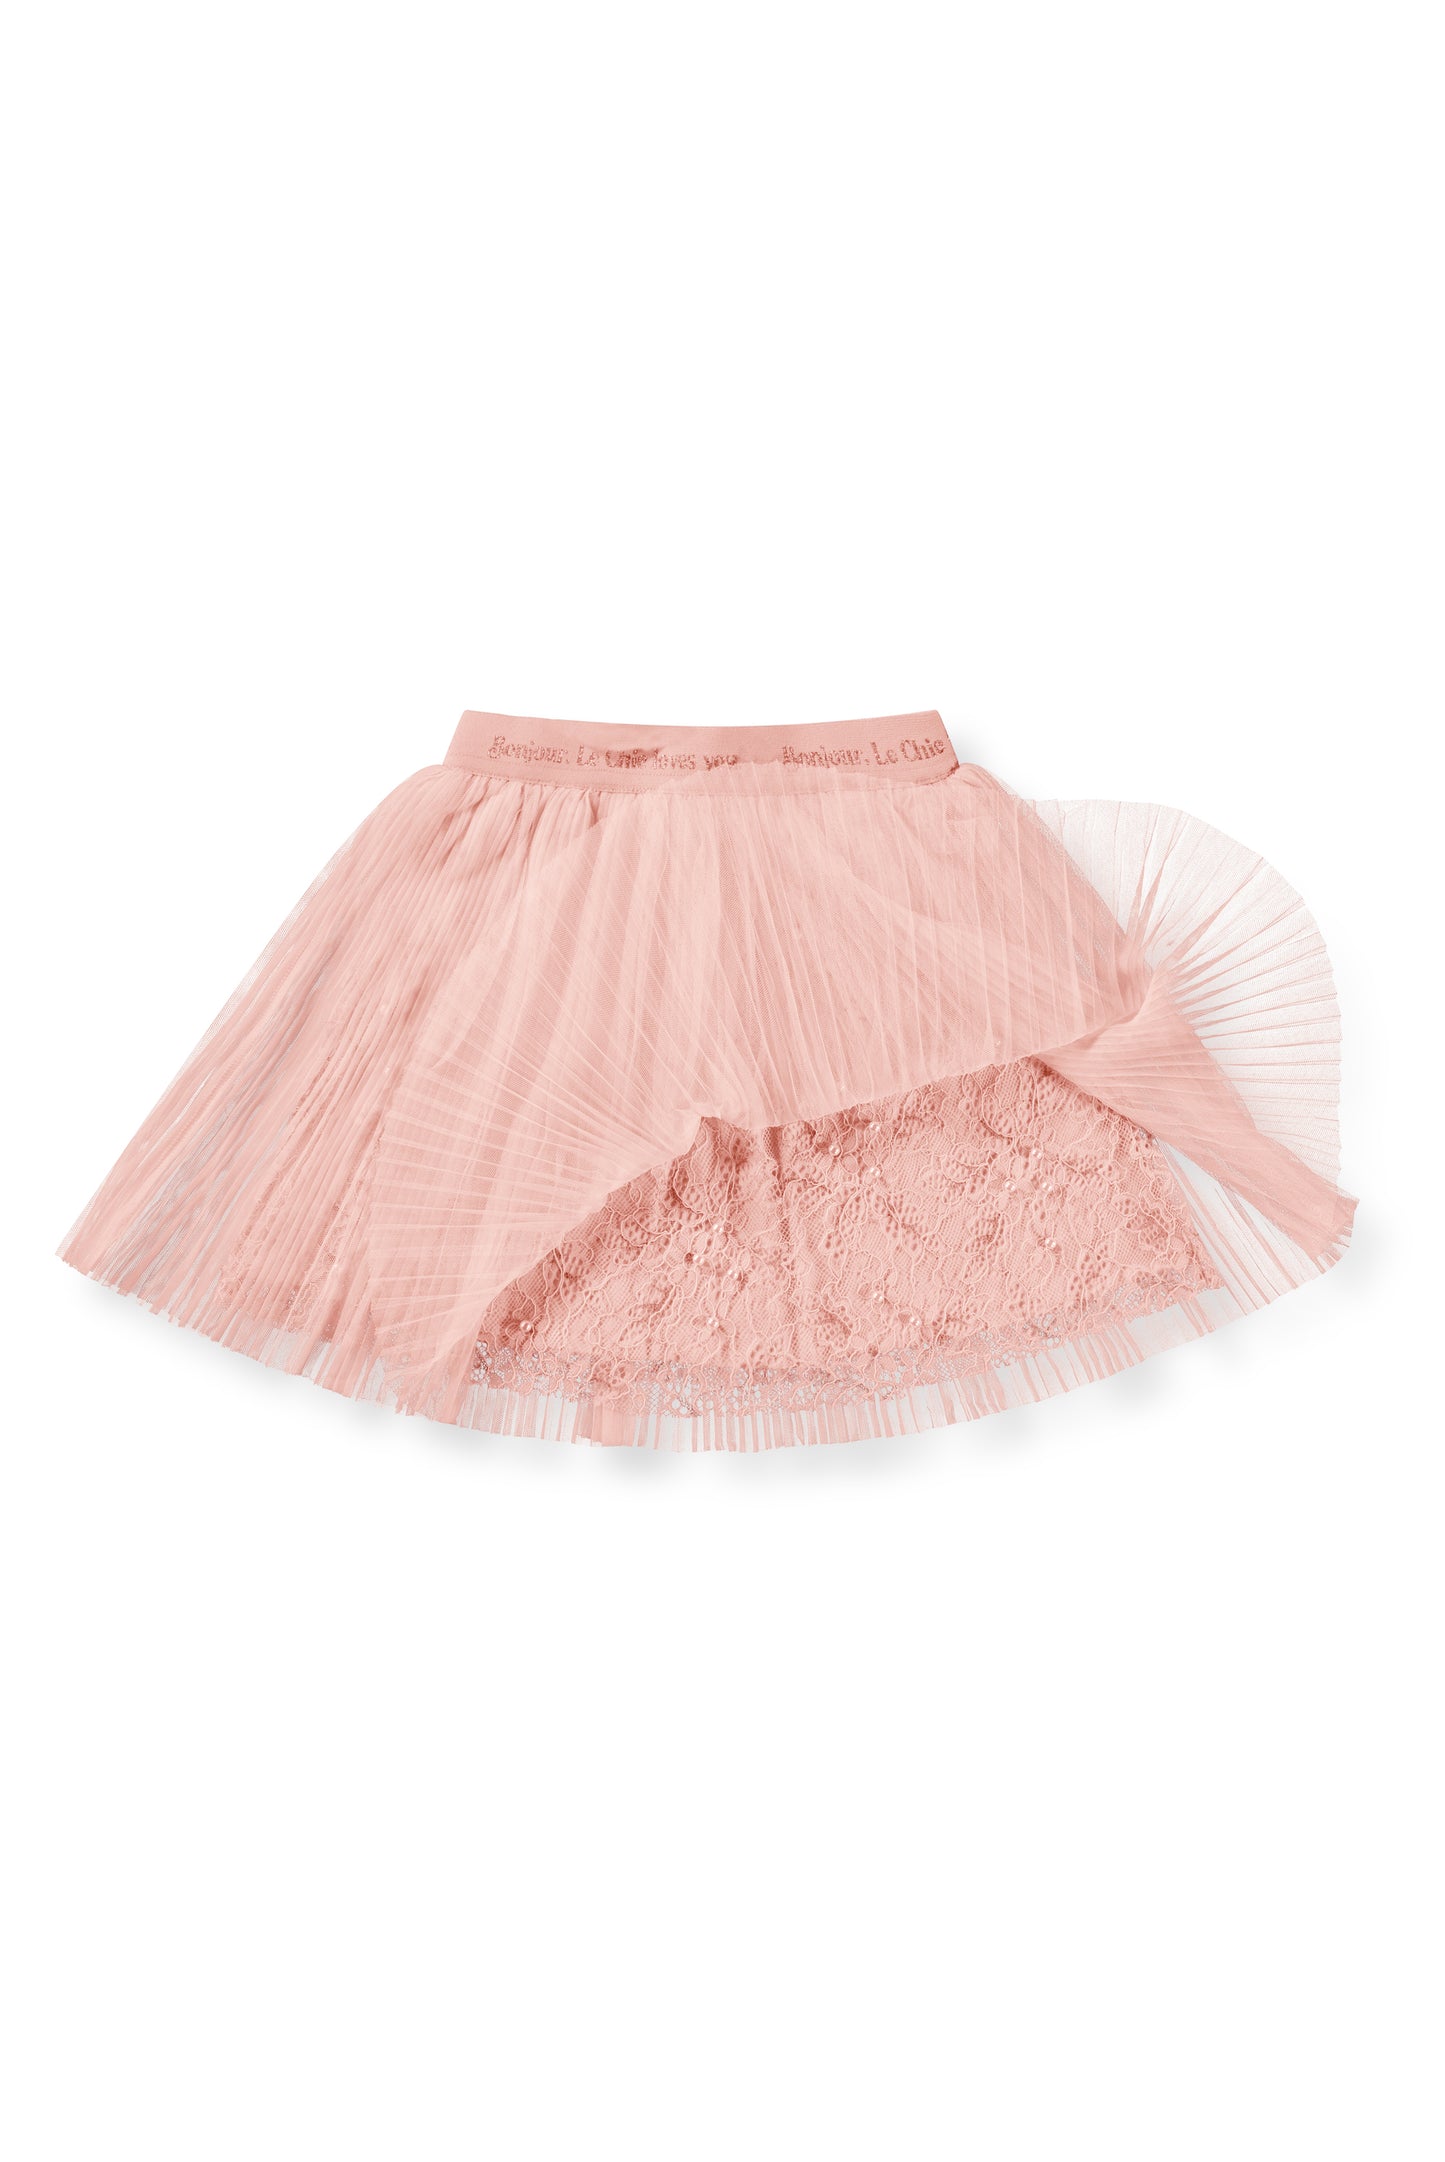 LE CHIC TRUTHY MESH & PEARLS SKIRT